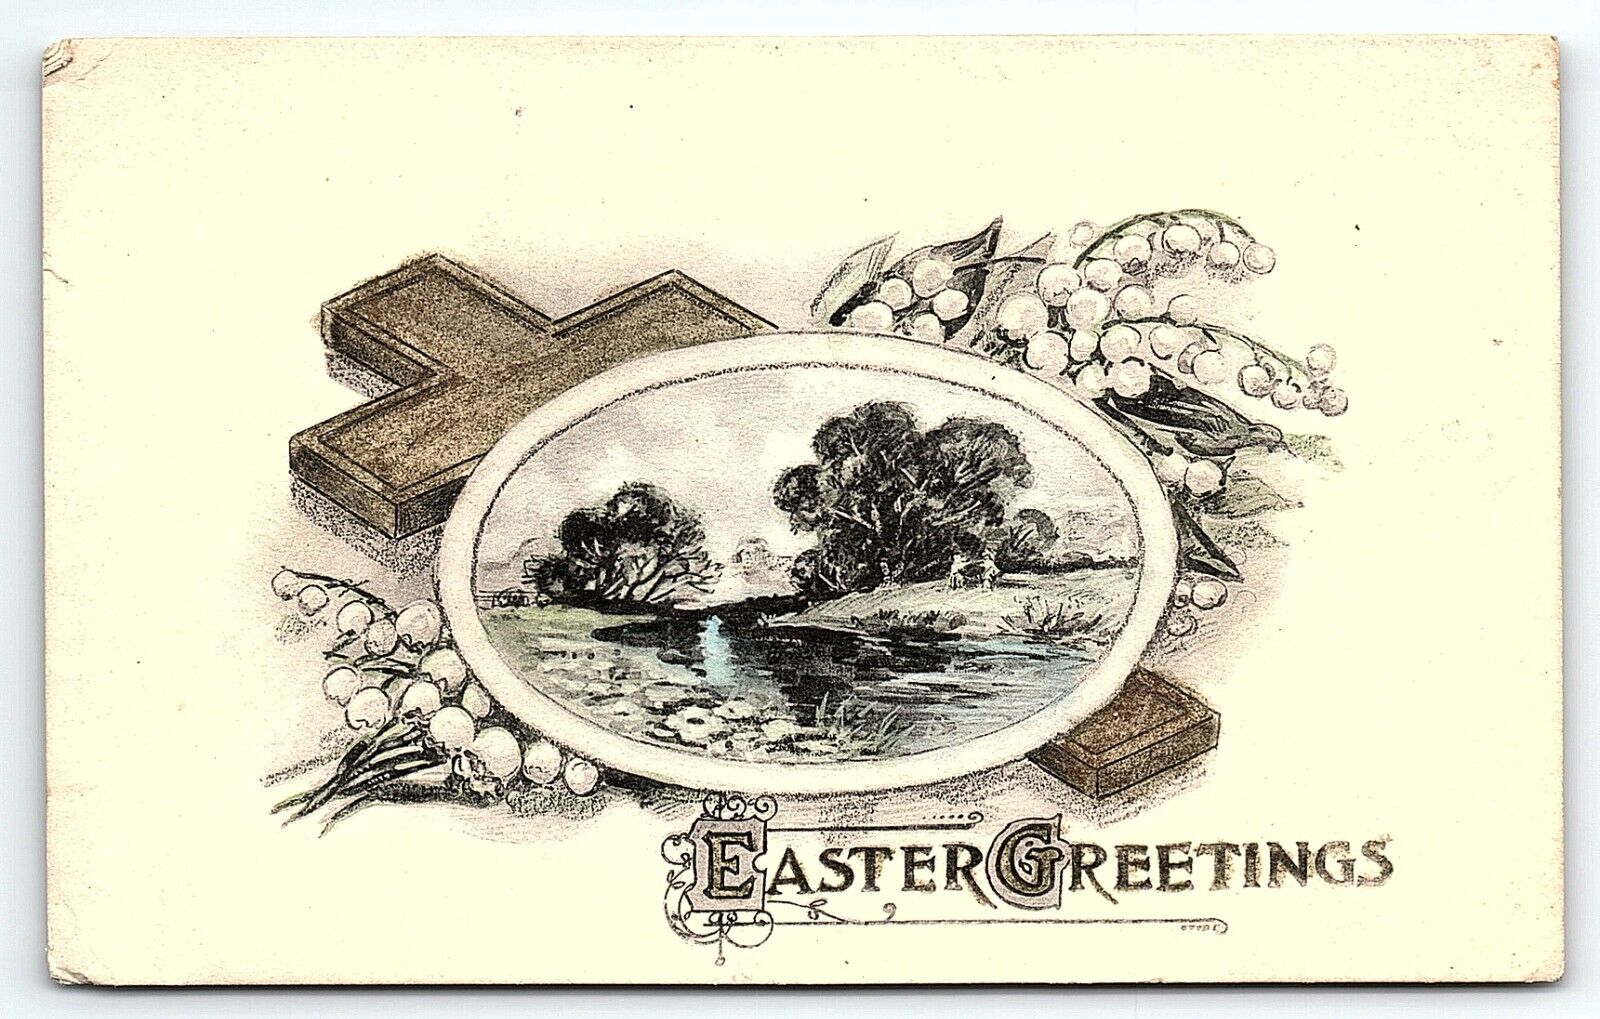 c1910 WEST MEDFORD MASS.  EASTER GREETINGS CROSS LILLIES EARLY POSTCARD P4299